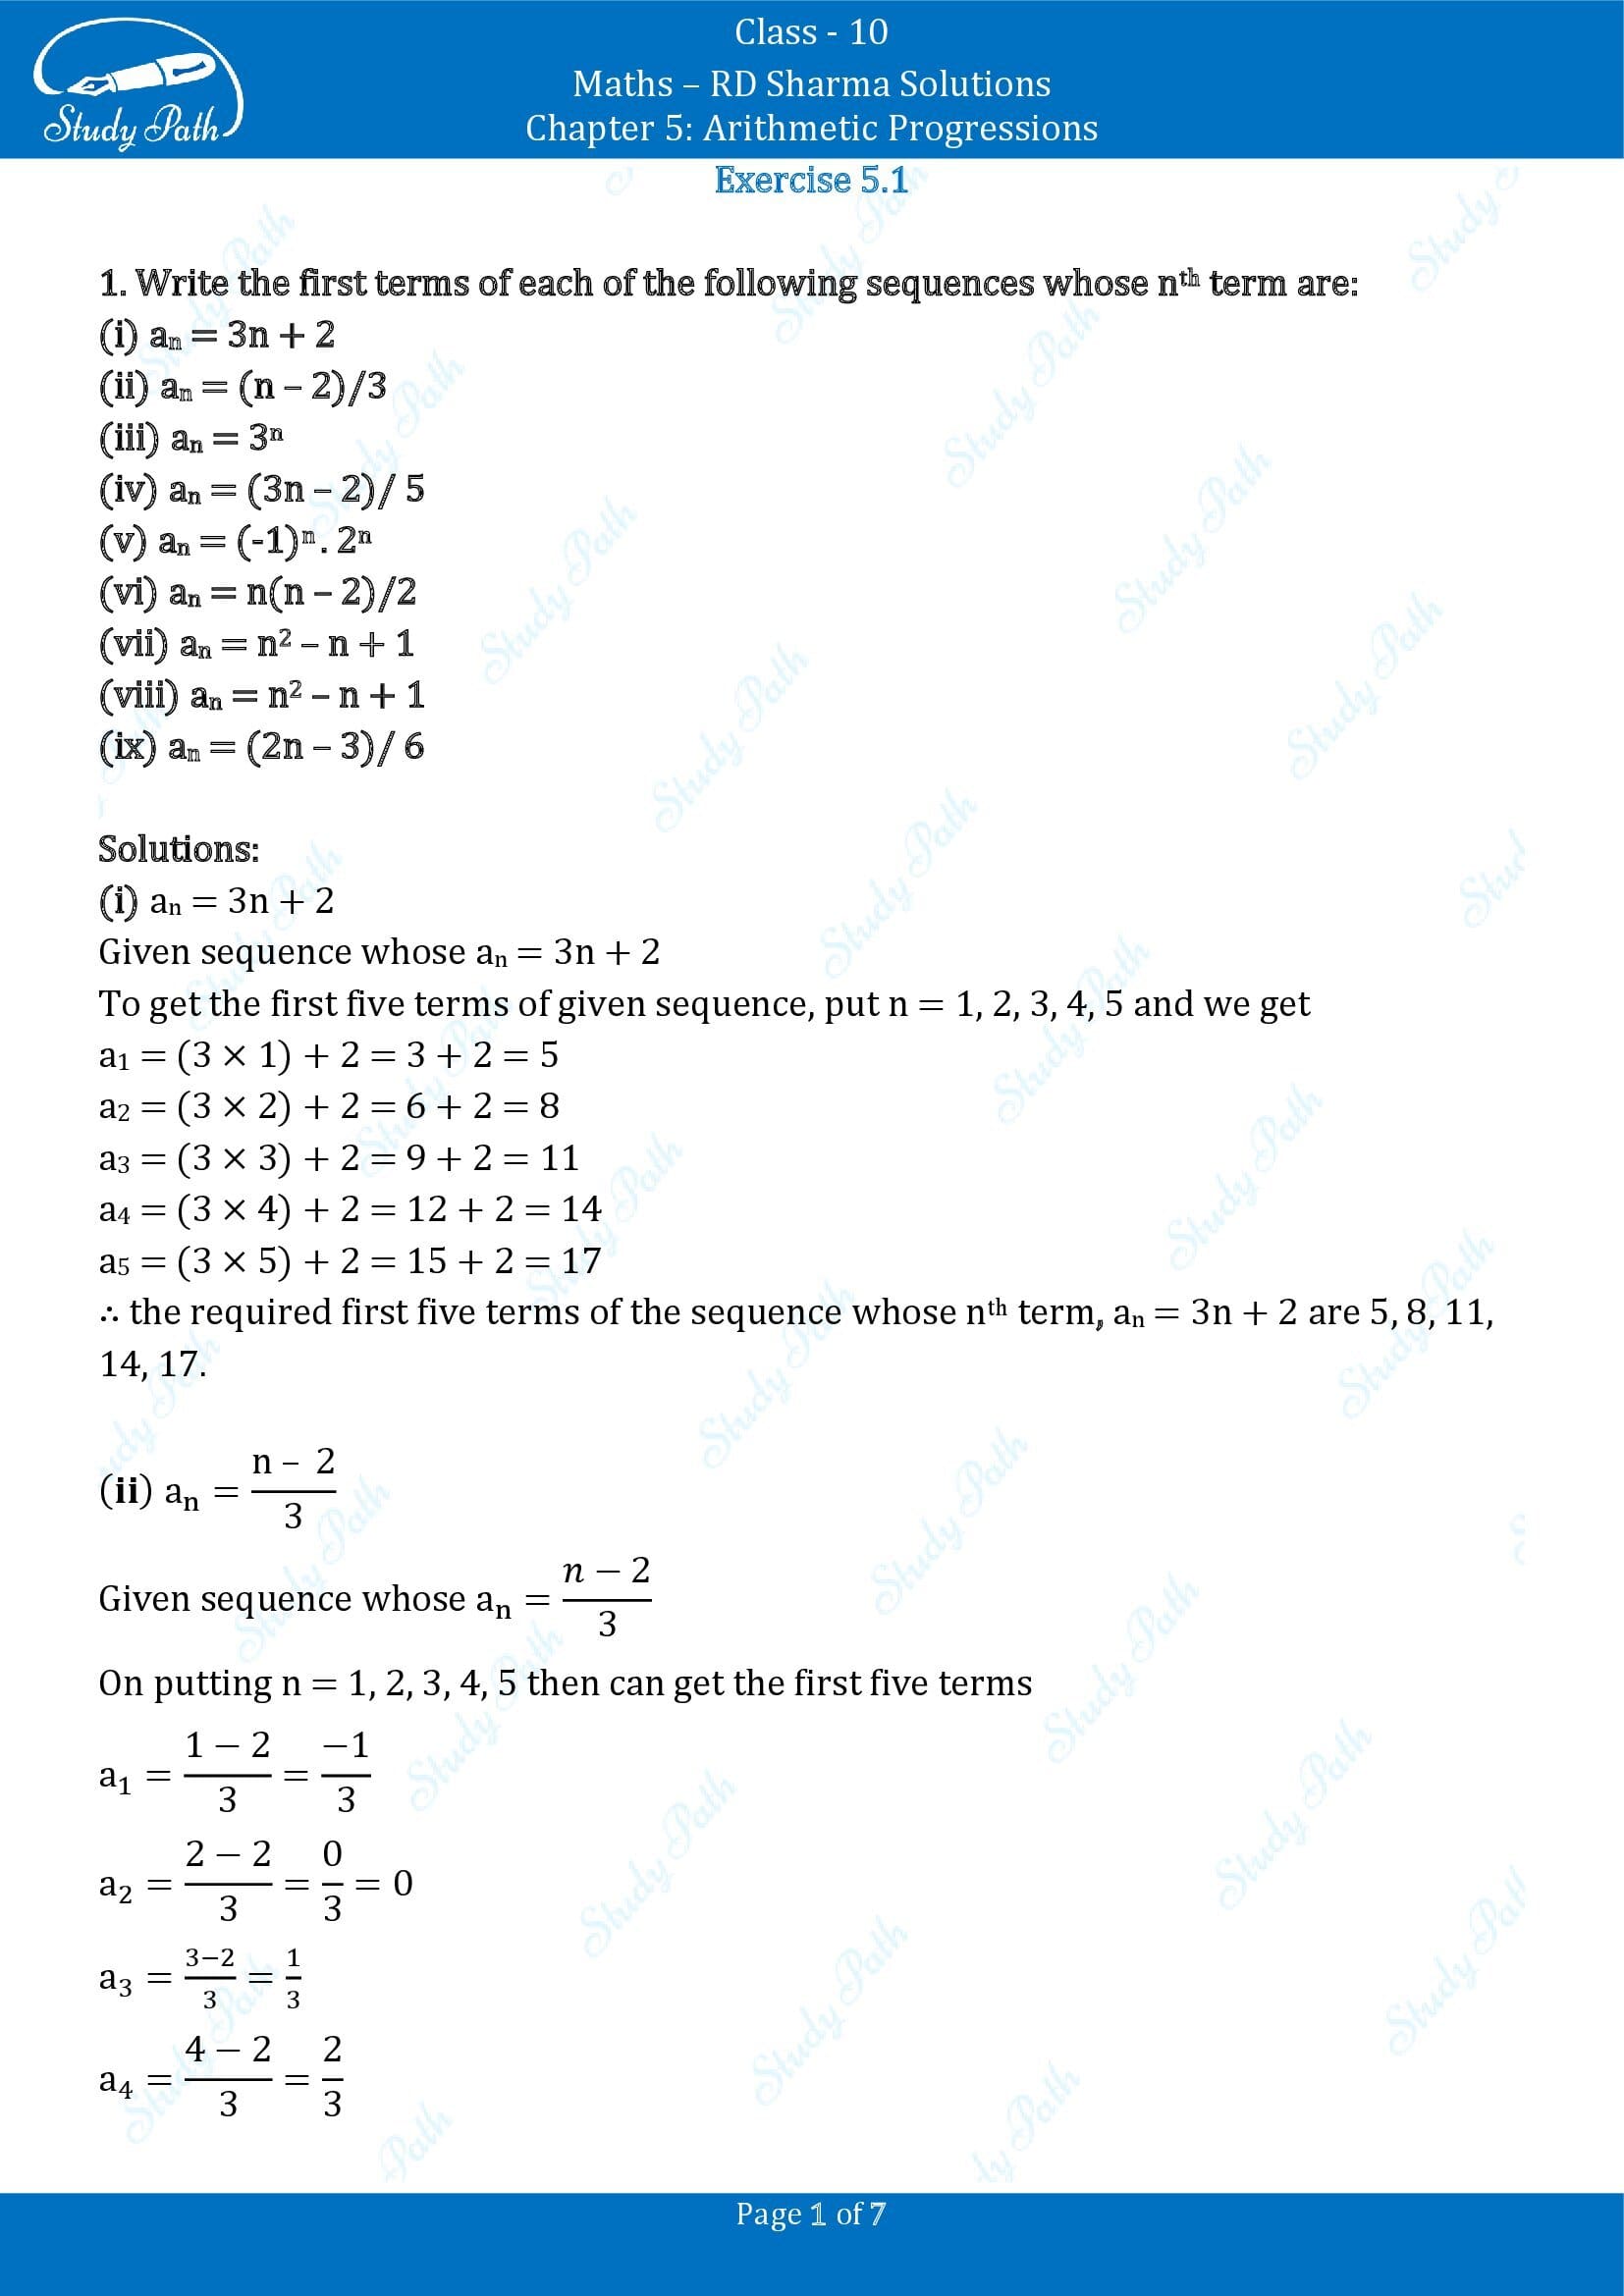 RD Sharma Solutions Class 10 Chapter 5 Arithmetic Progressions Exercise 5.1 00001